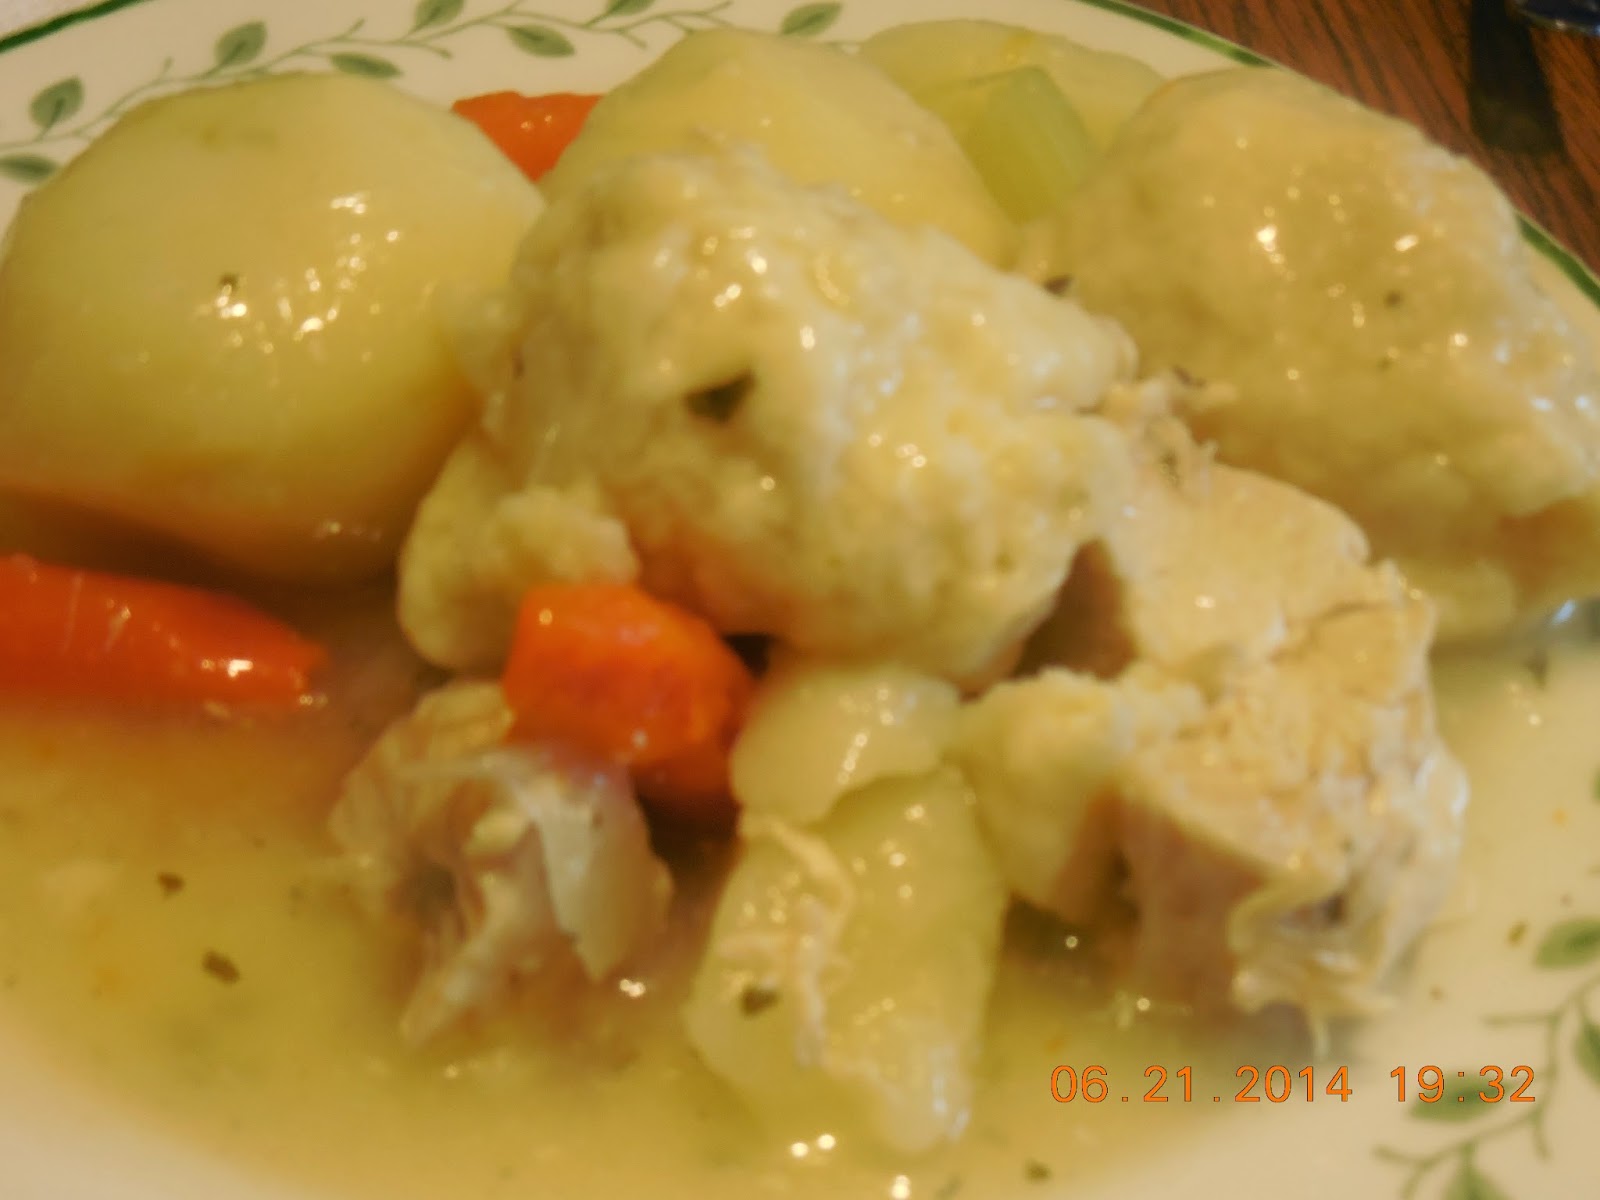 Recipes for Judys' Foodies: Amish Style Chicken & Dumplings from ...